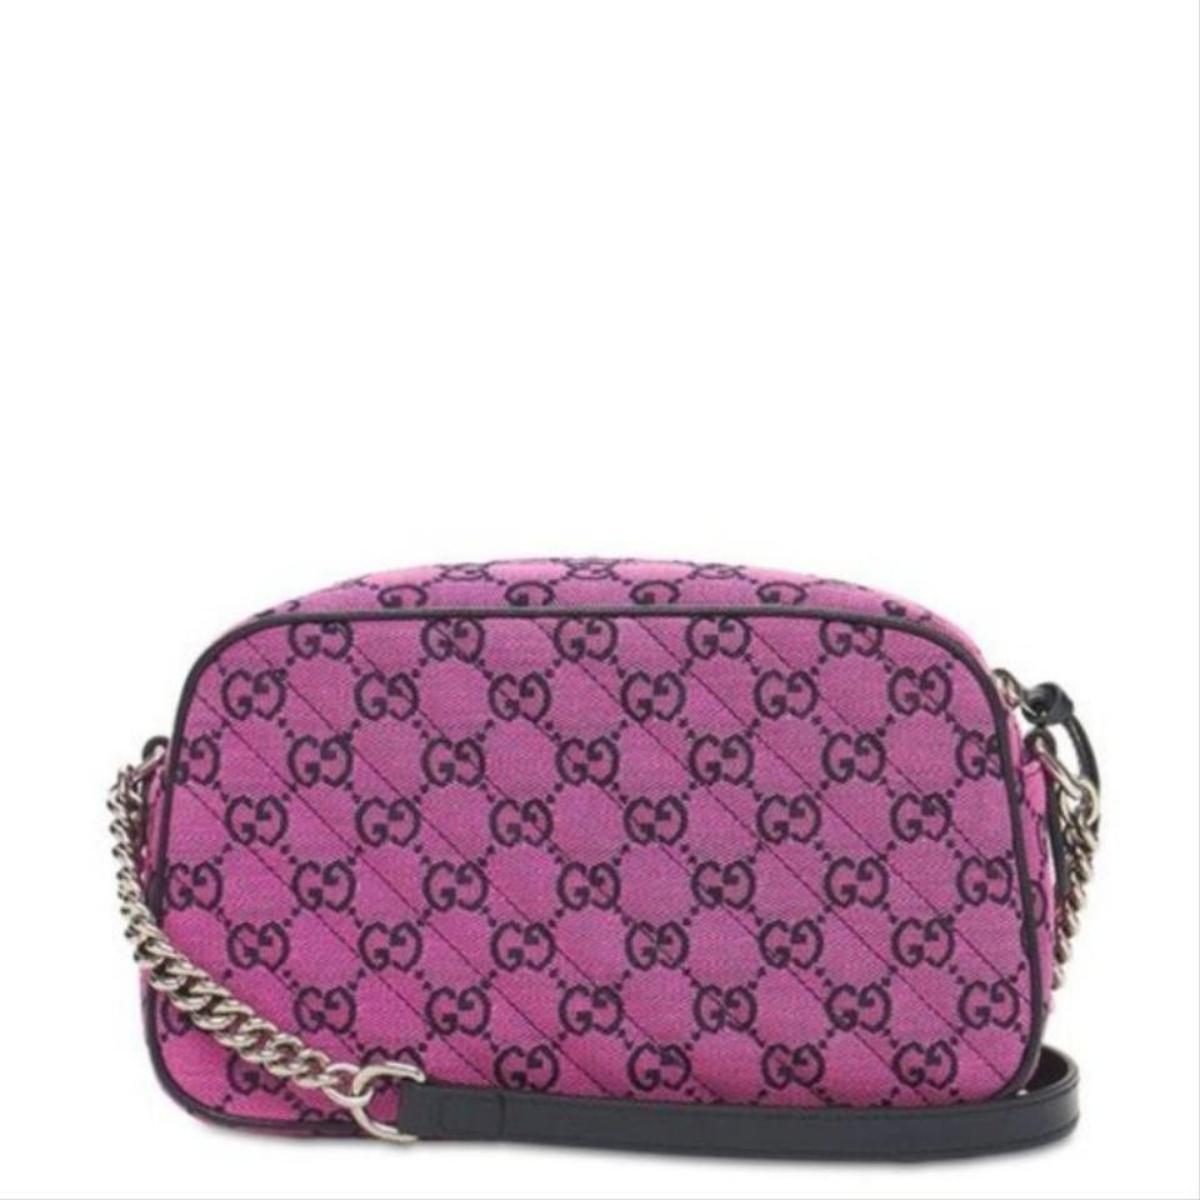 gucci gg marmont bag pink